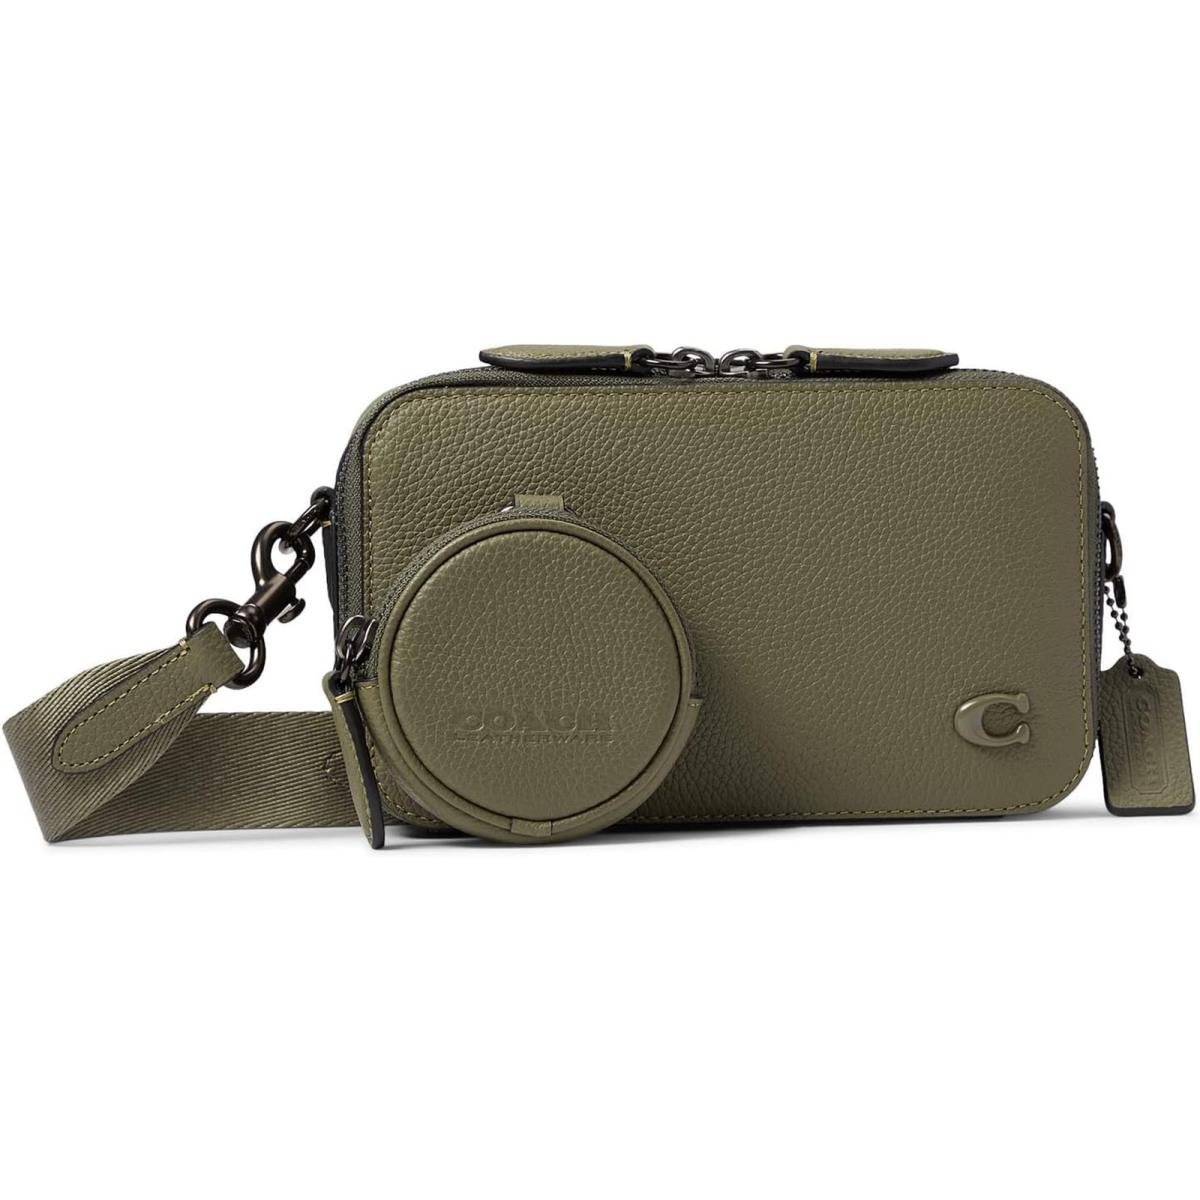 Coach Mens Charter Slim Crossbody in Pebble Leather with Sculpted C Hardware Bra Army Green